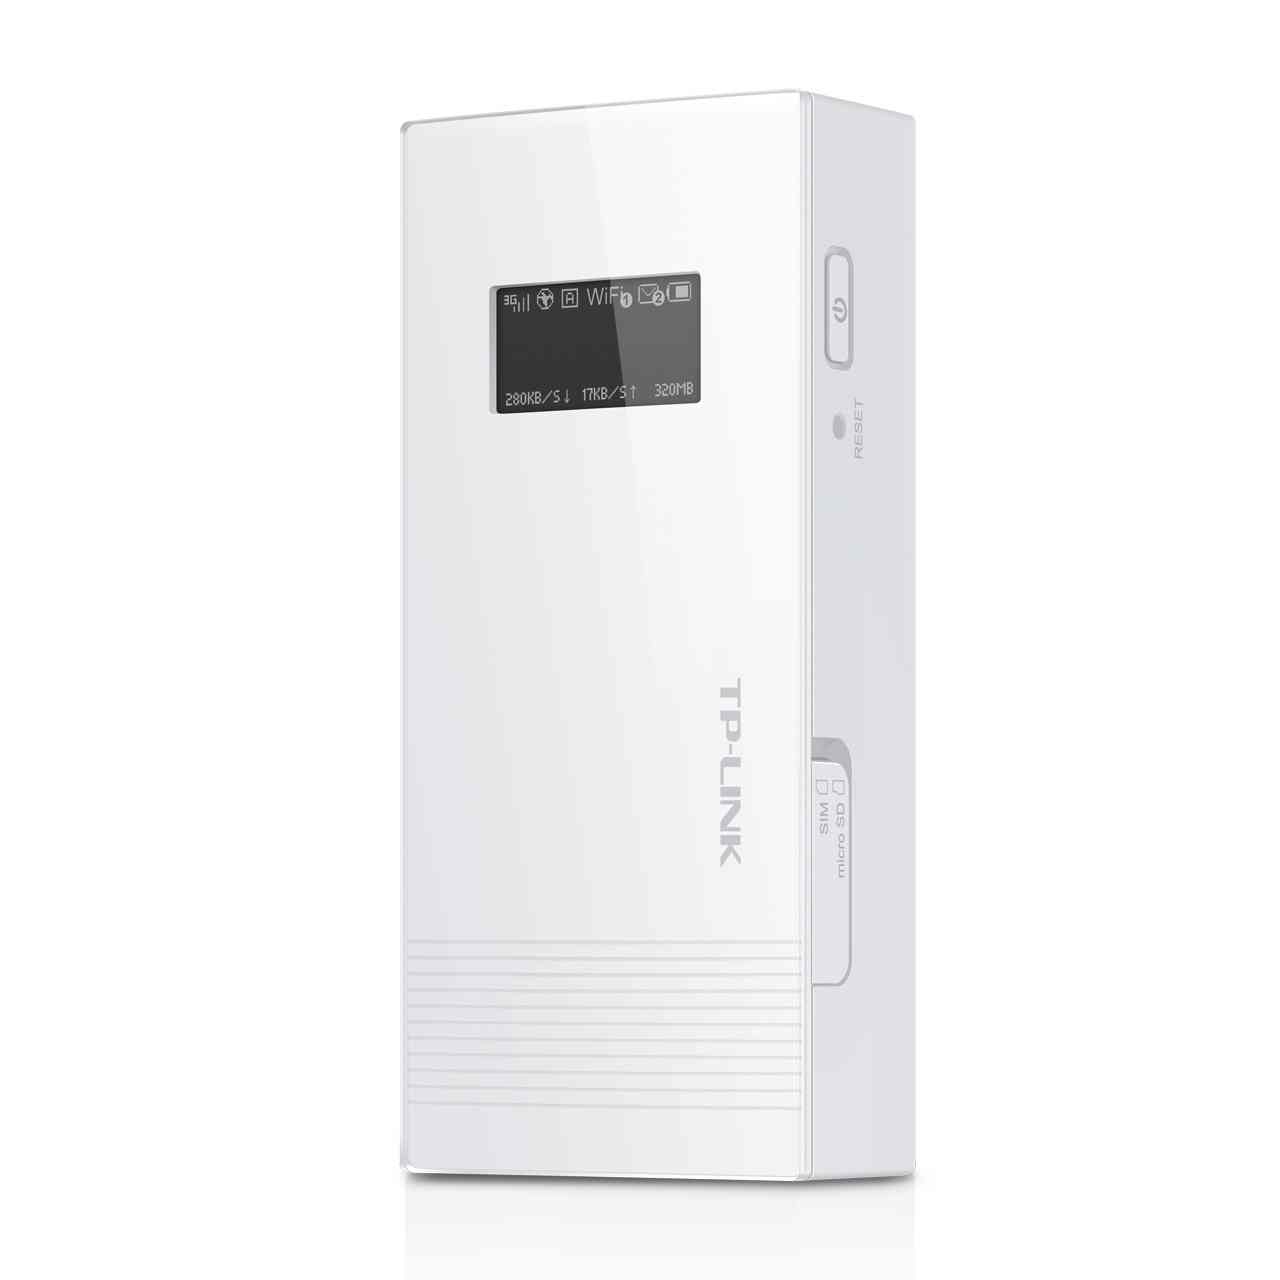 Power Bank Router Wi Fipara 3g Movil